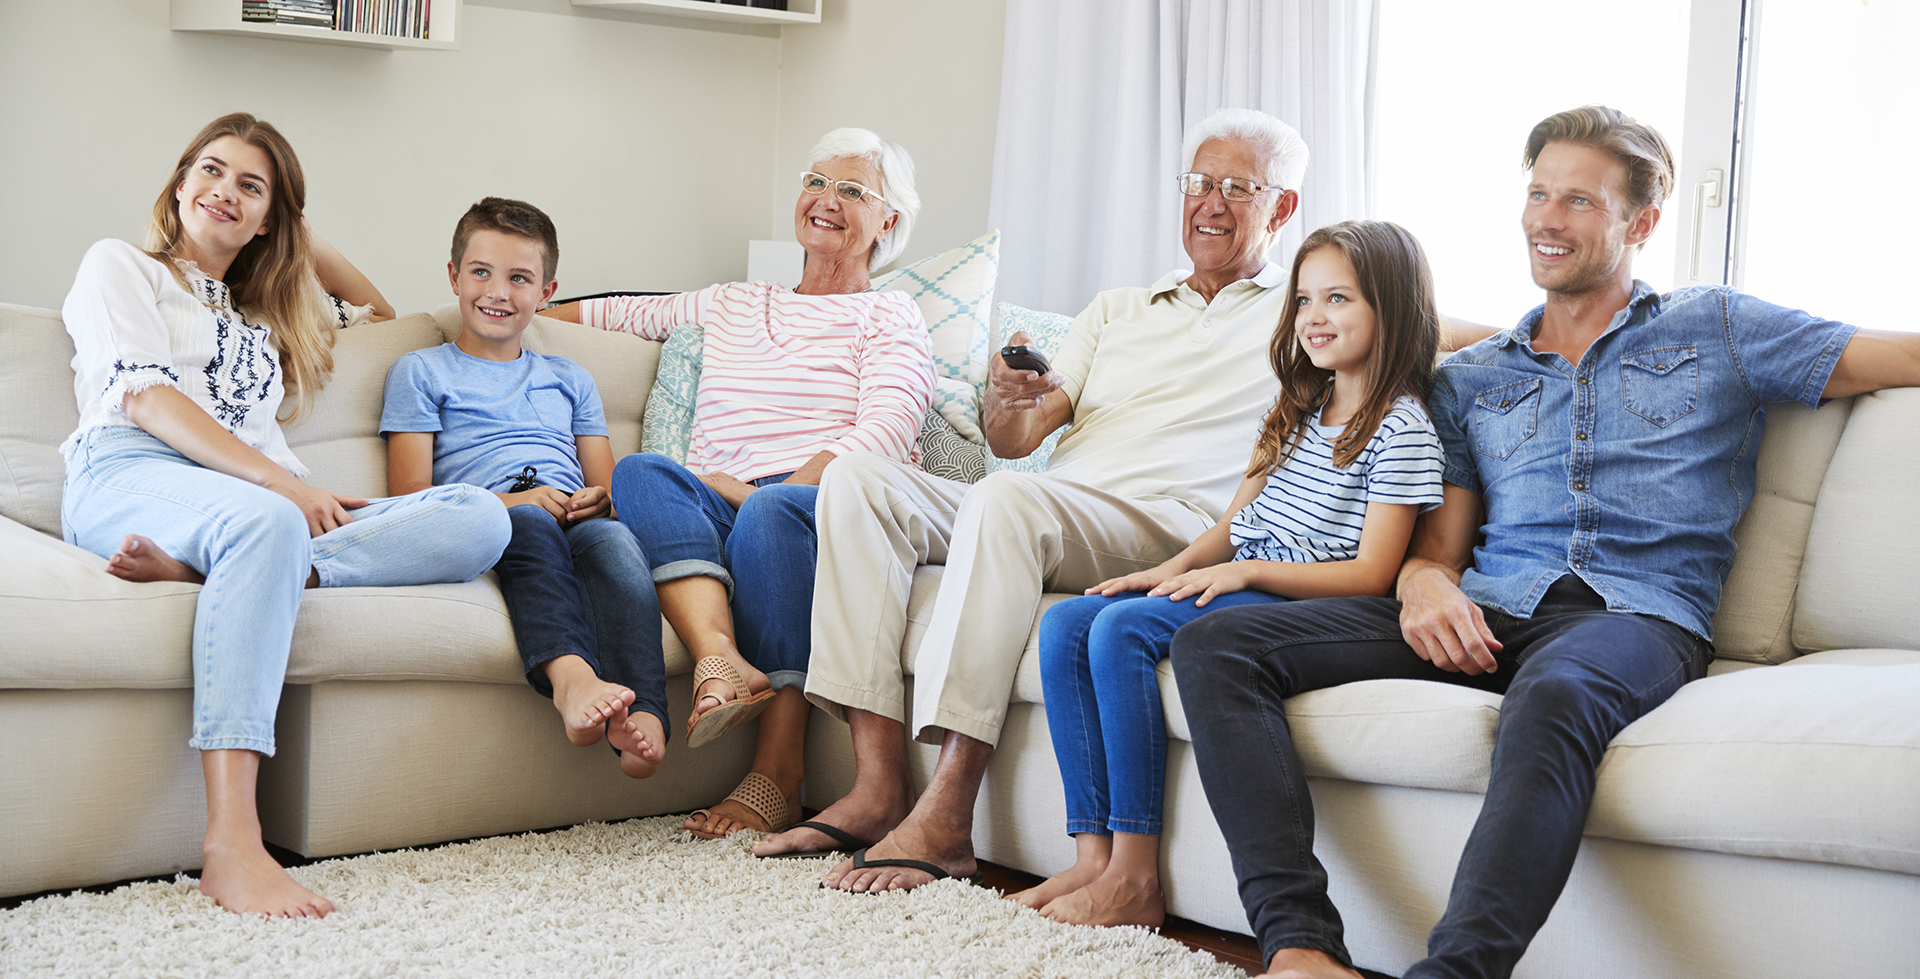 Multi-Generational Family Watching Home Videos - Media Transfer Pros